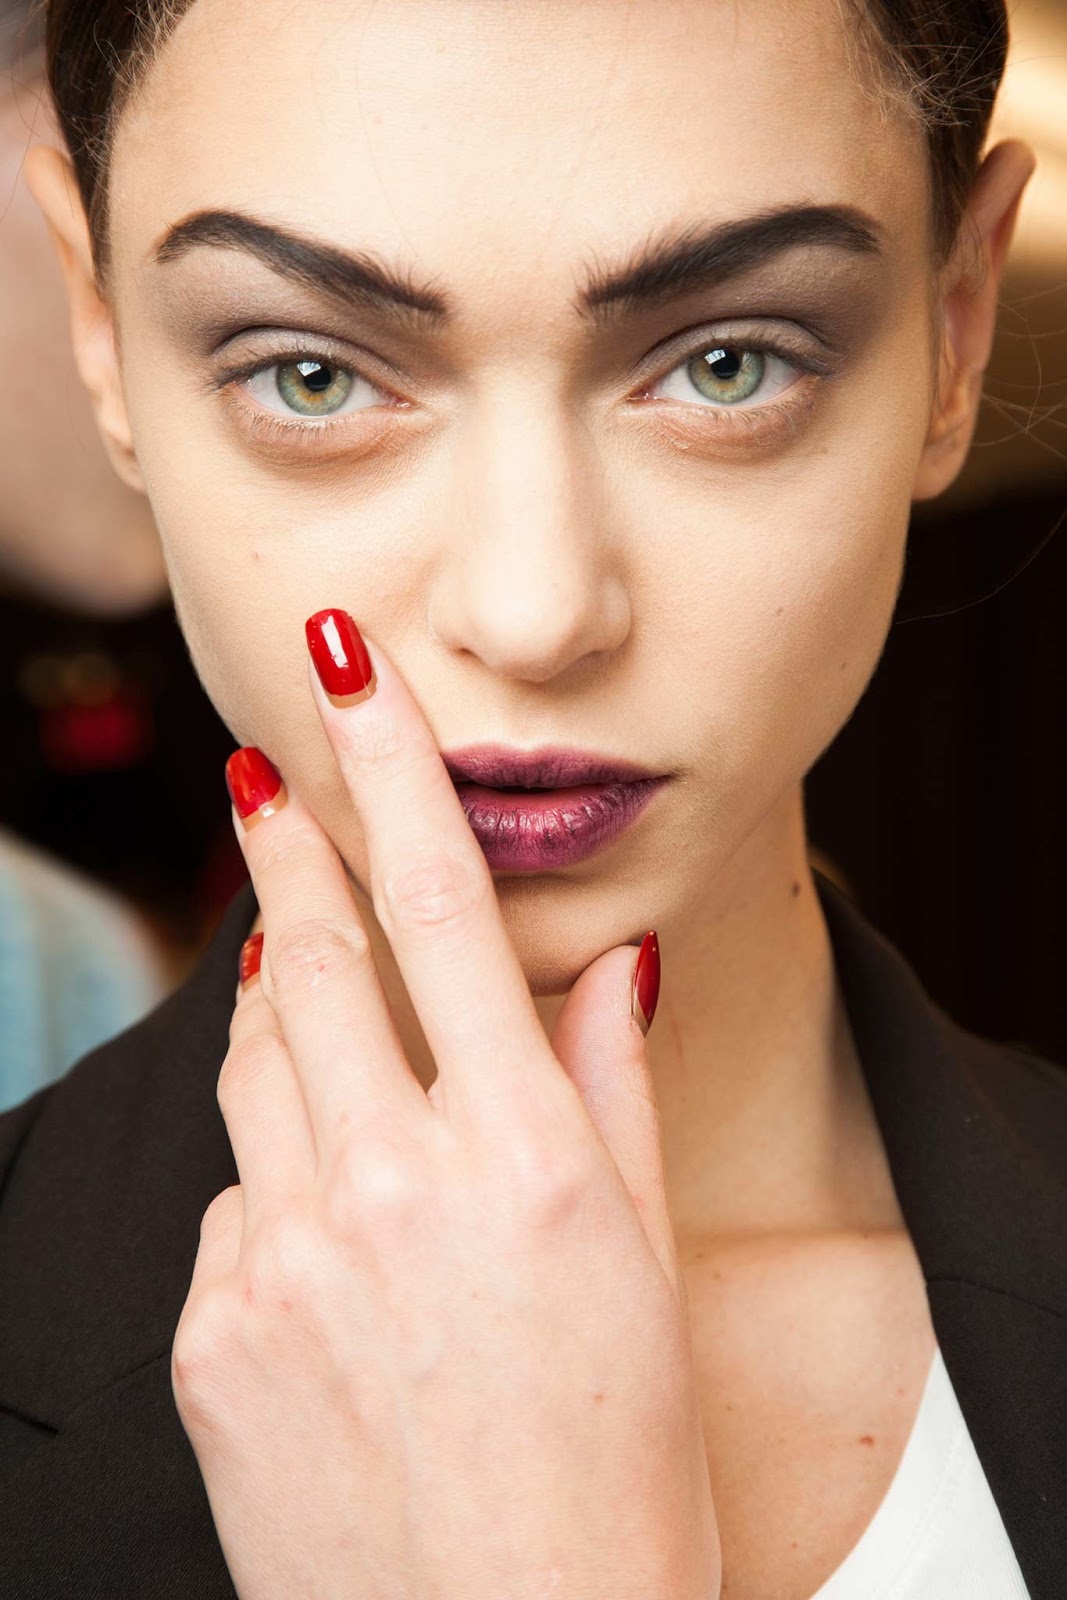 Makeup Trends for Fall-Winter 2015/2016 - Beauty Is Within